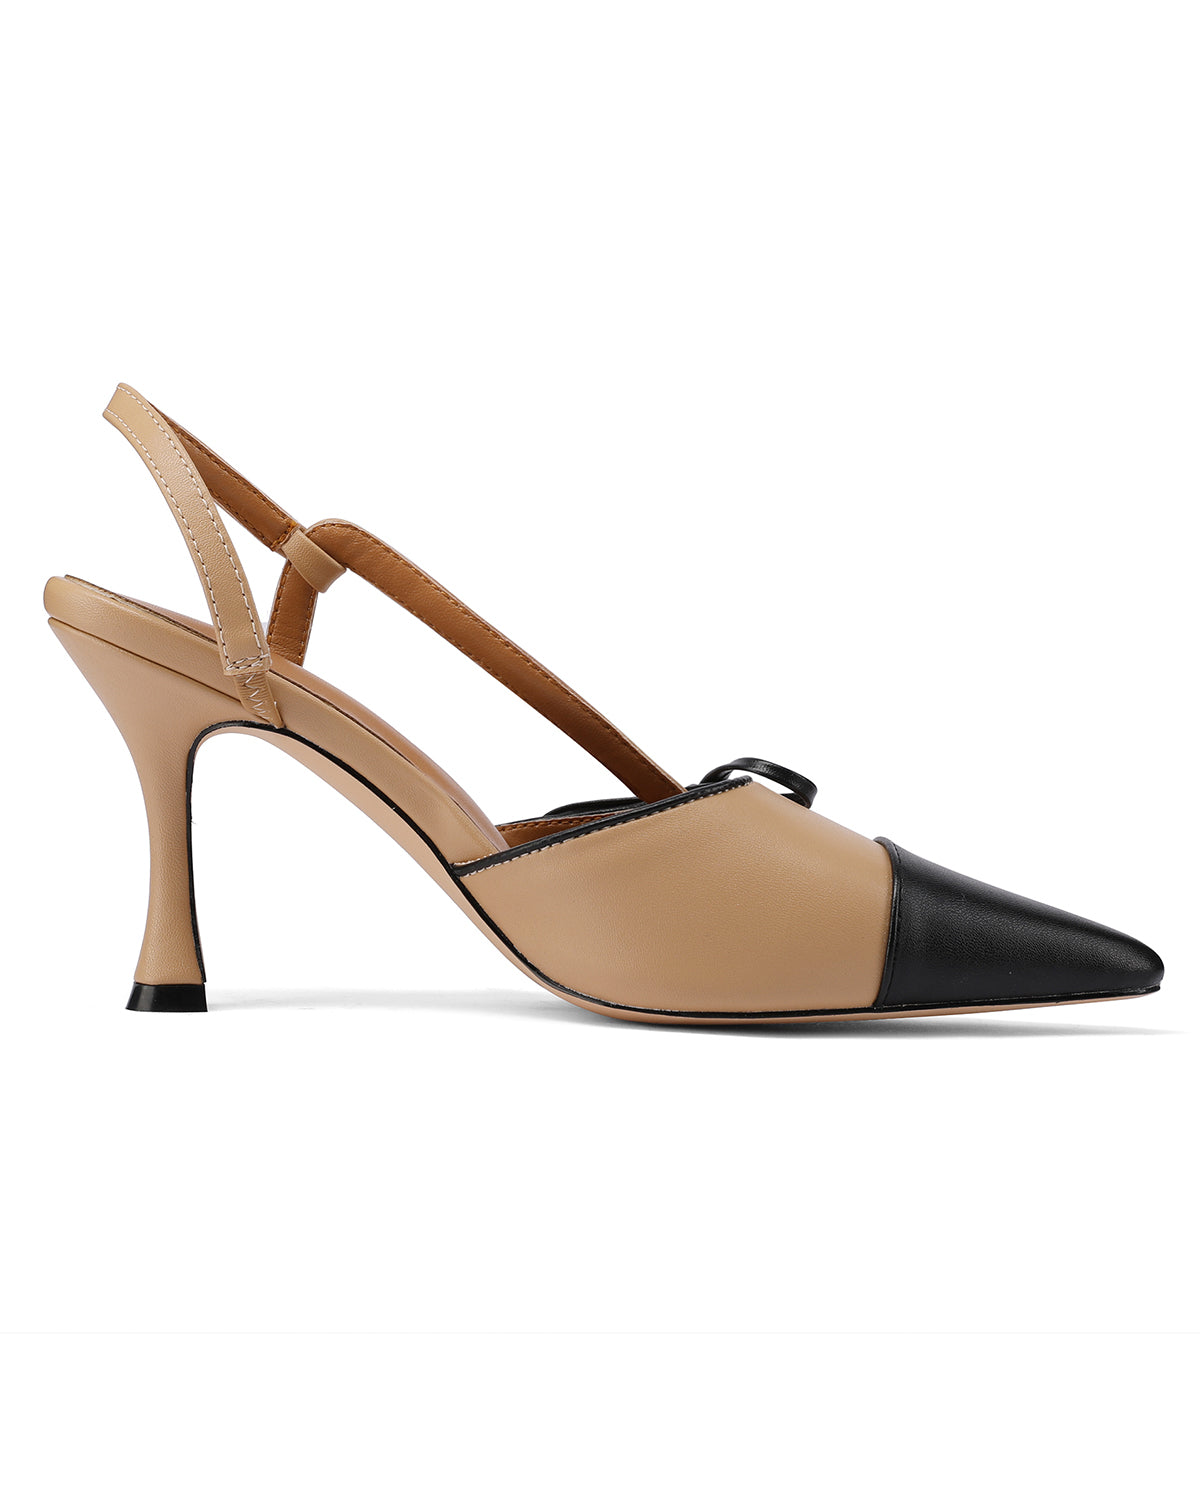 Matte leather slingback high heel pump shoes for ladies